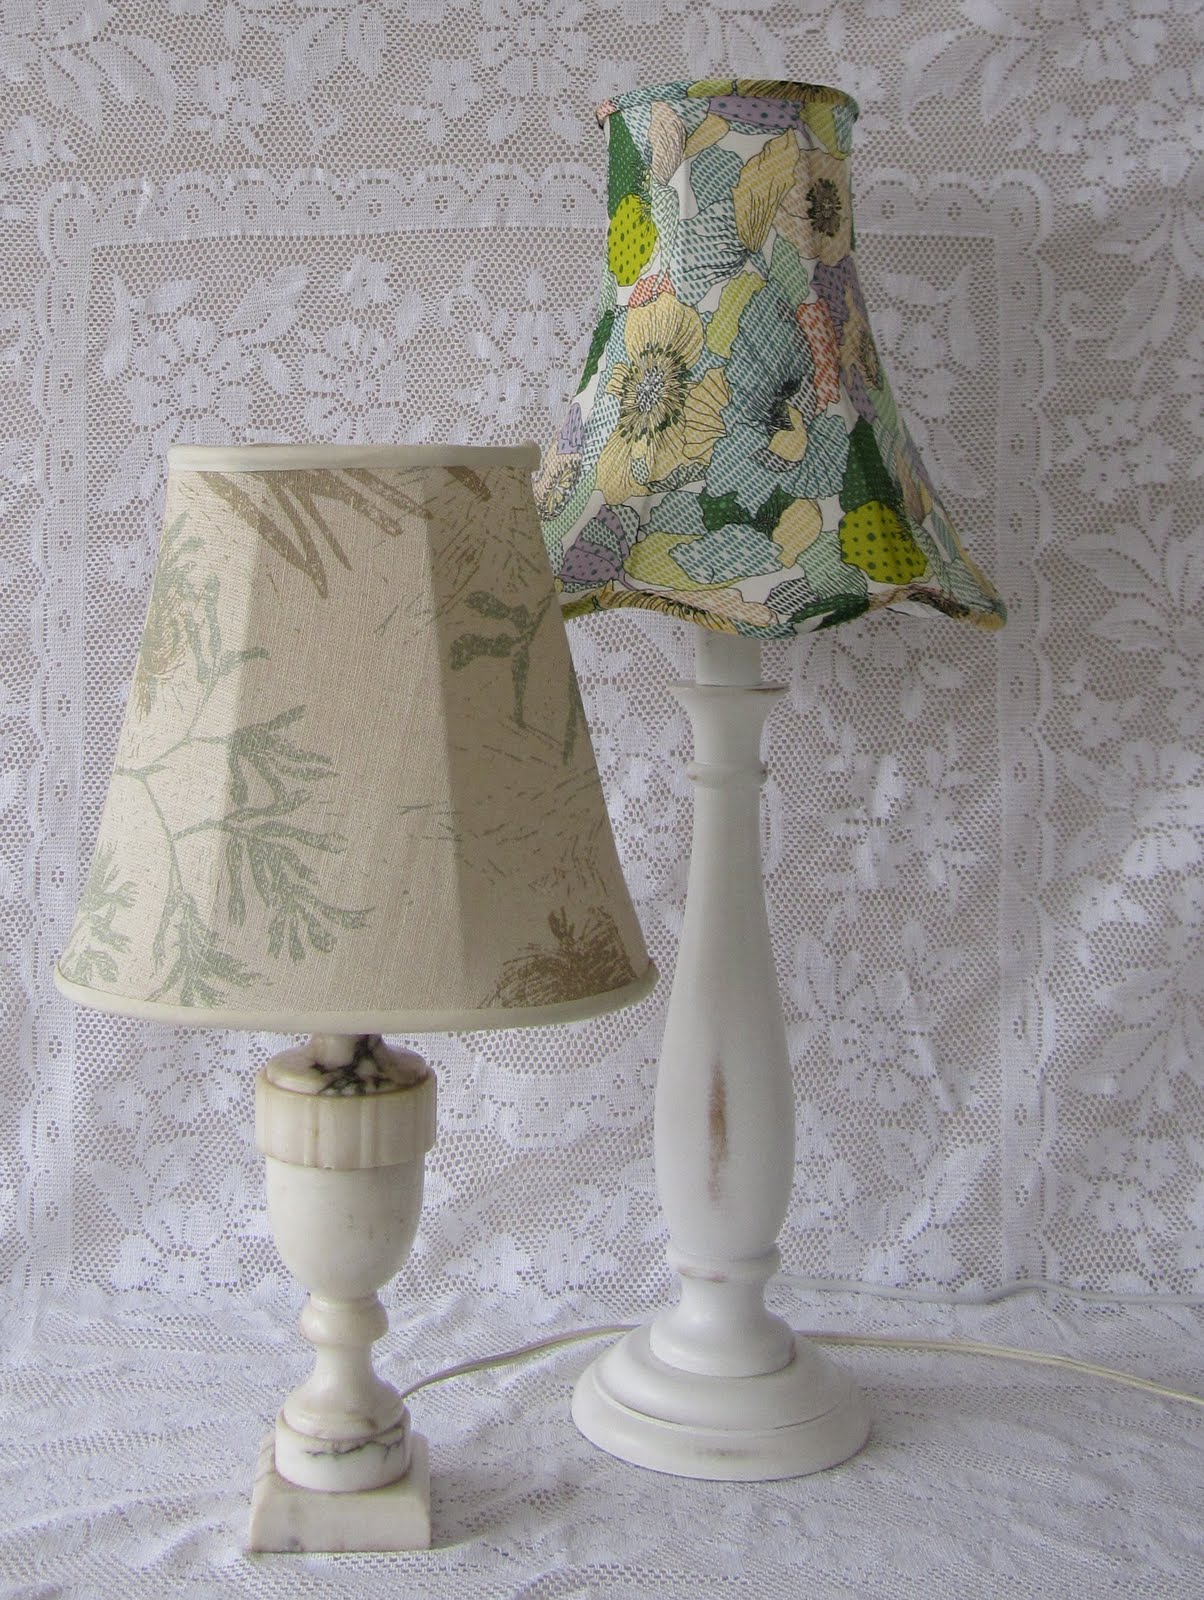 Recover A Lampshade Tutorial, How Do You Cover A Lampshade Frame With Fabric